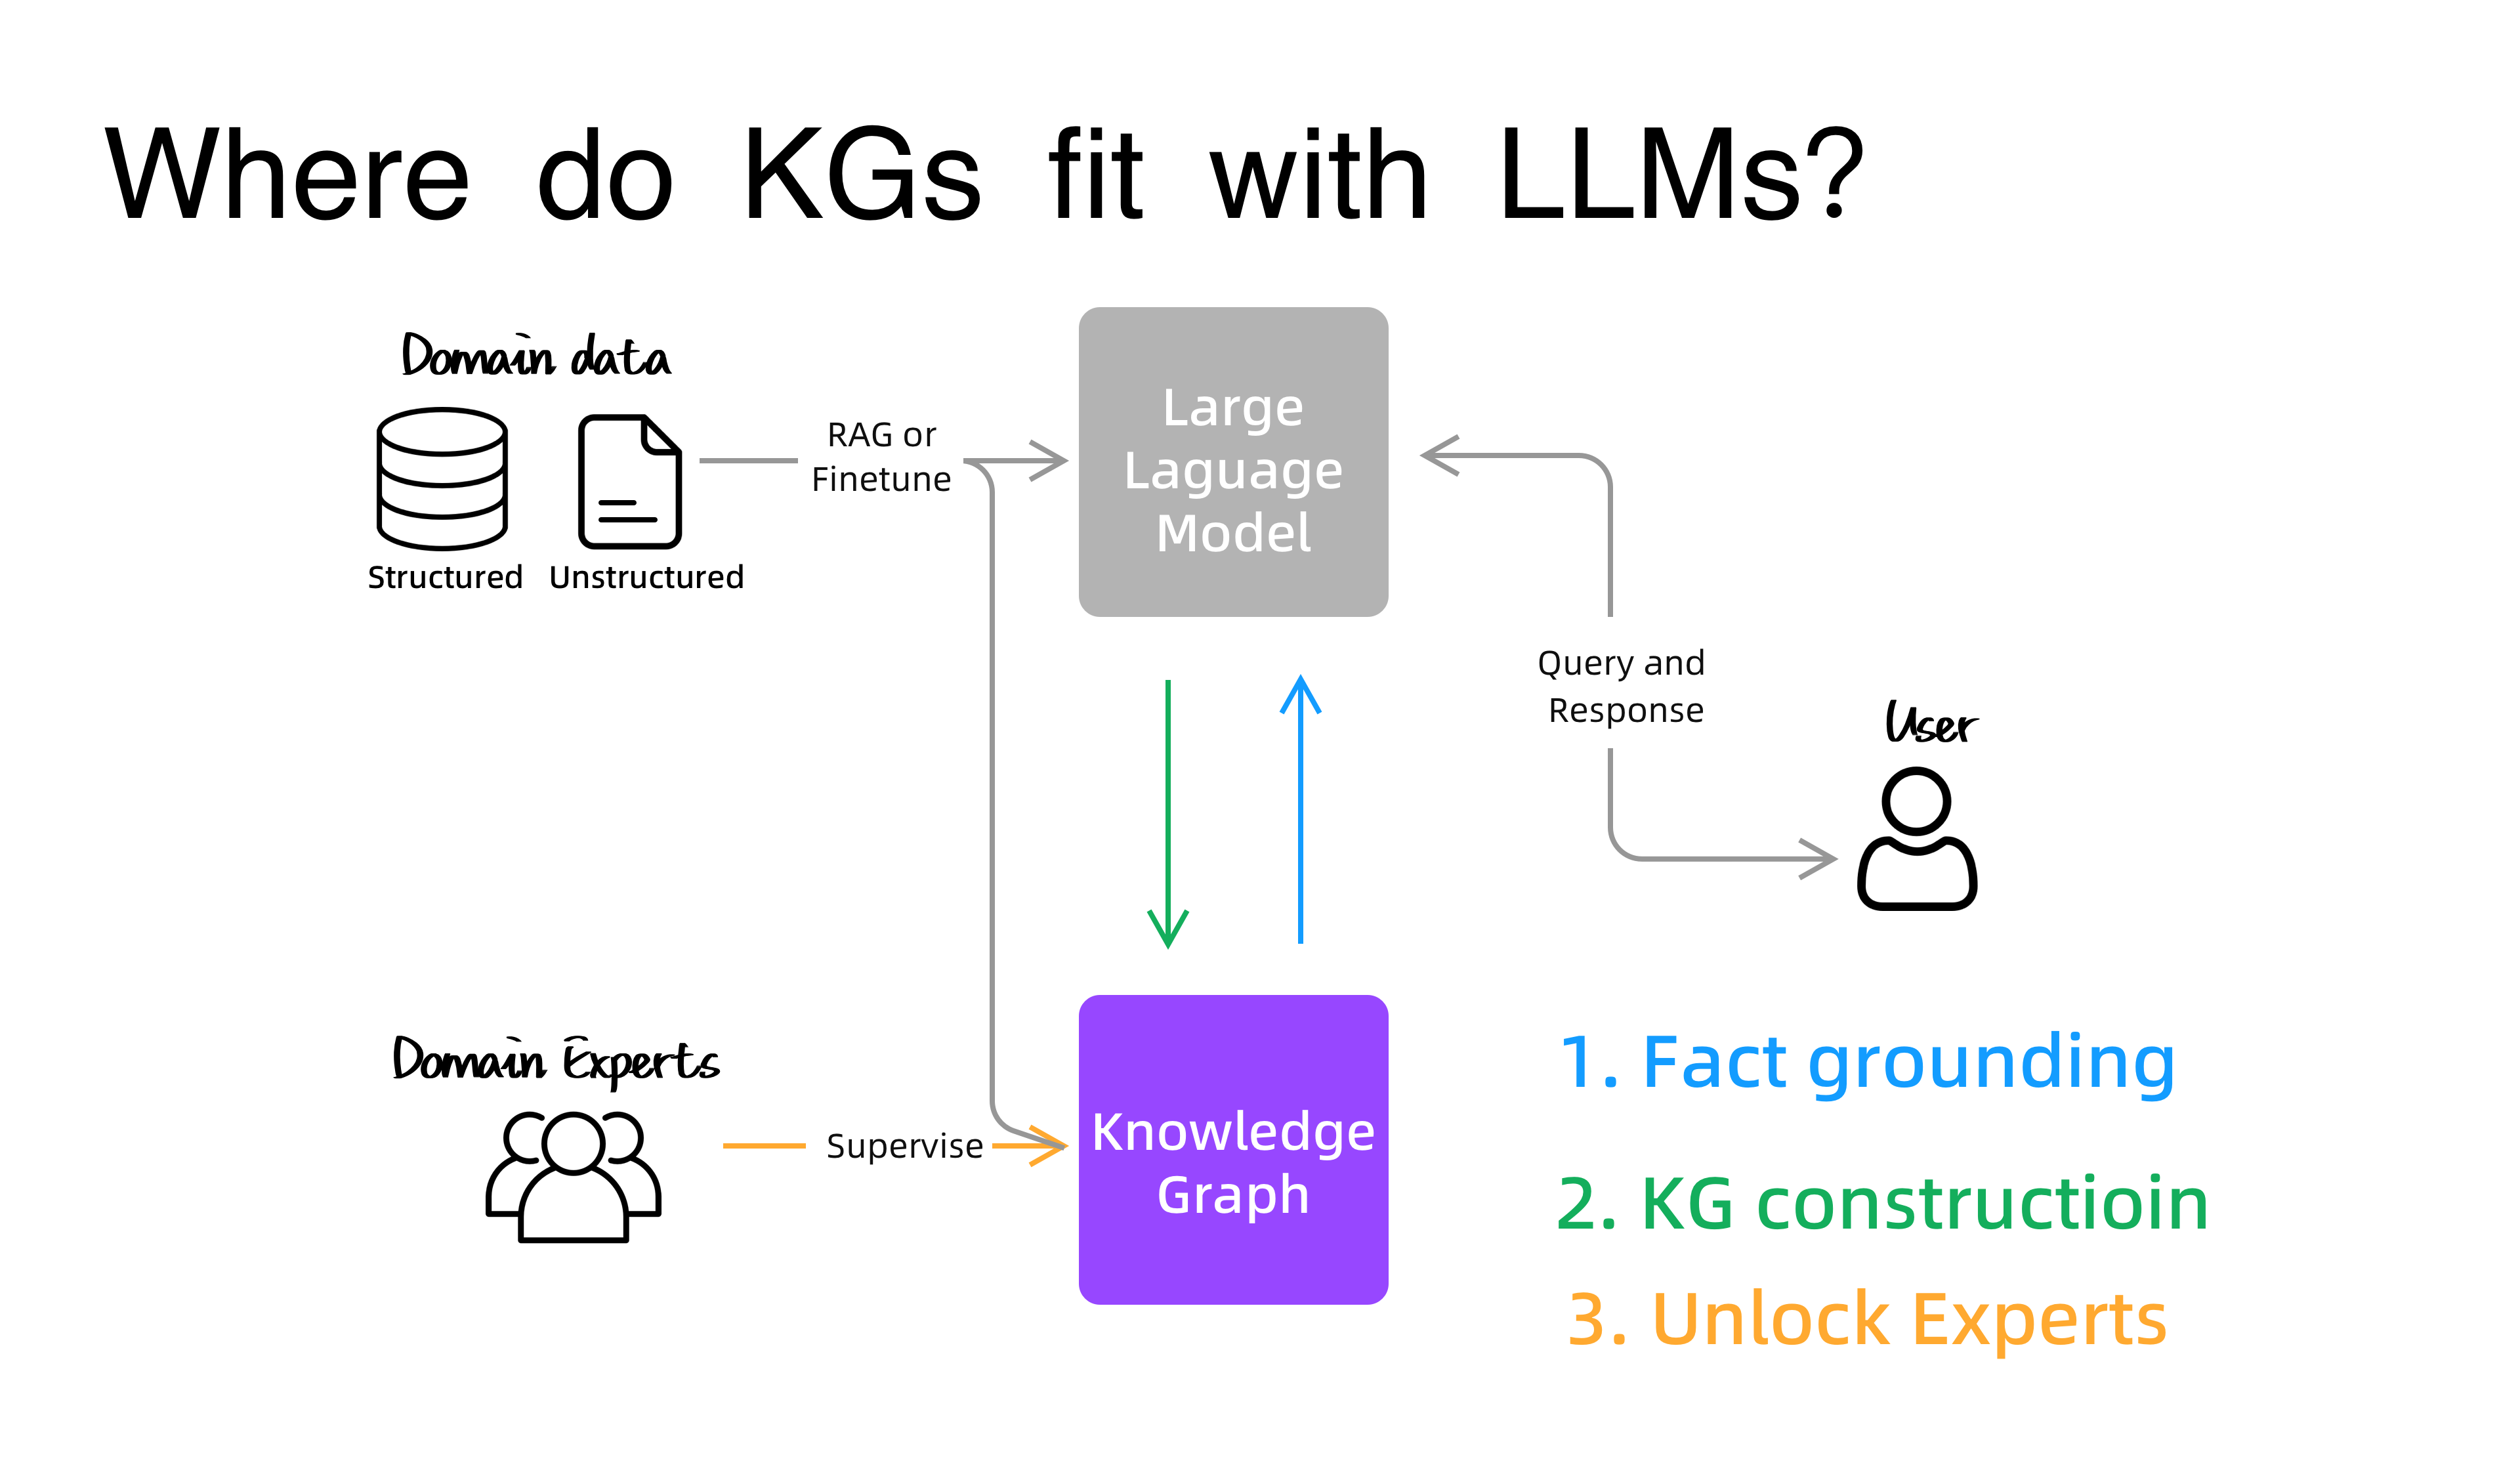 Where do KGs fit with LLMs